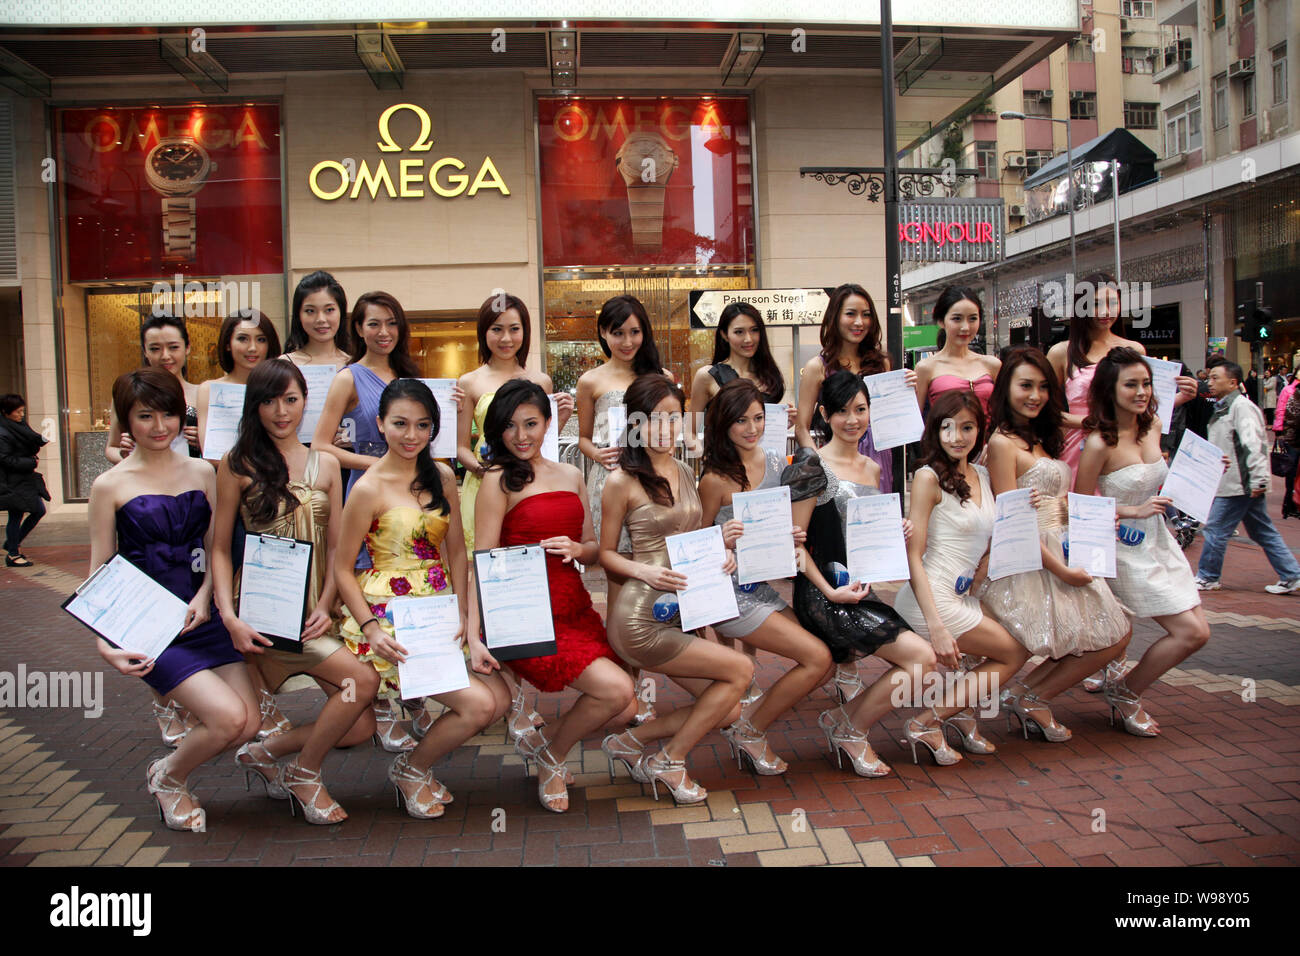 20 Contestants Of The Miss Asia Pageant 2011 Pose During An Event To